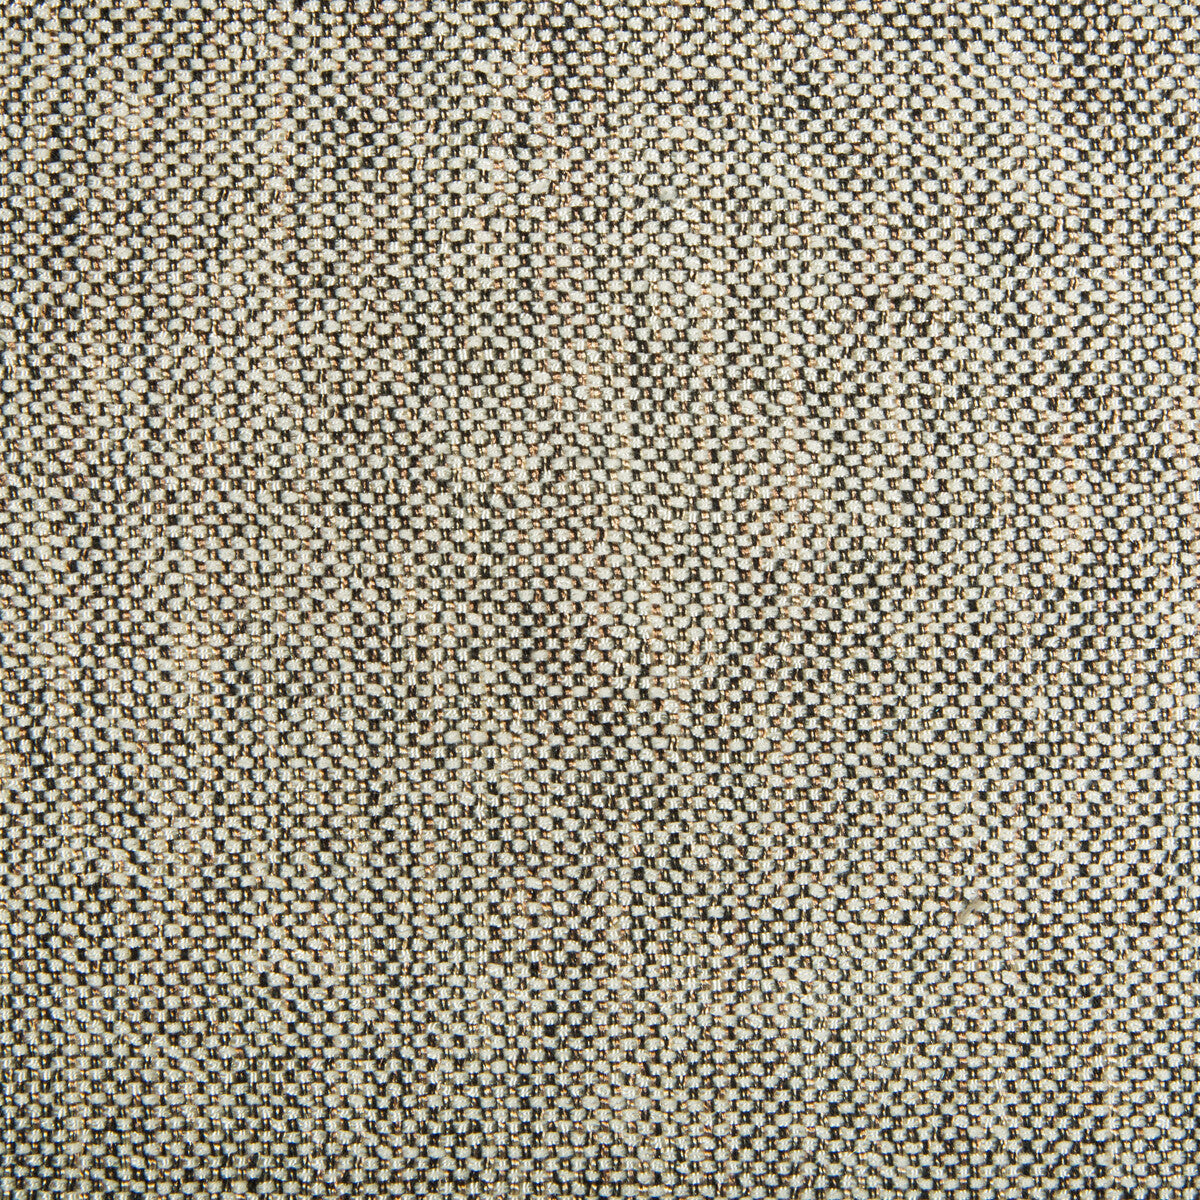 Kravet Contract fabric in 4458-816 color - pattern 4458.816.0 - by Kravet Contract